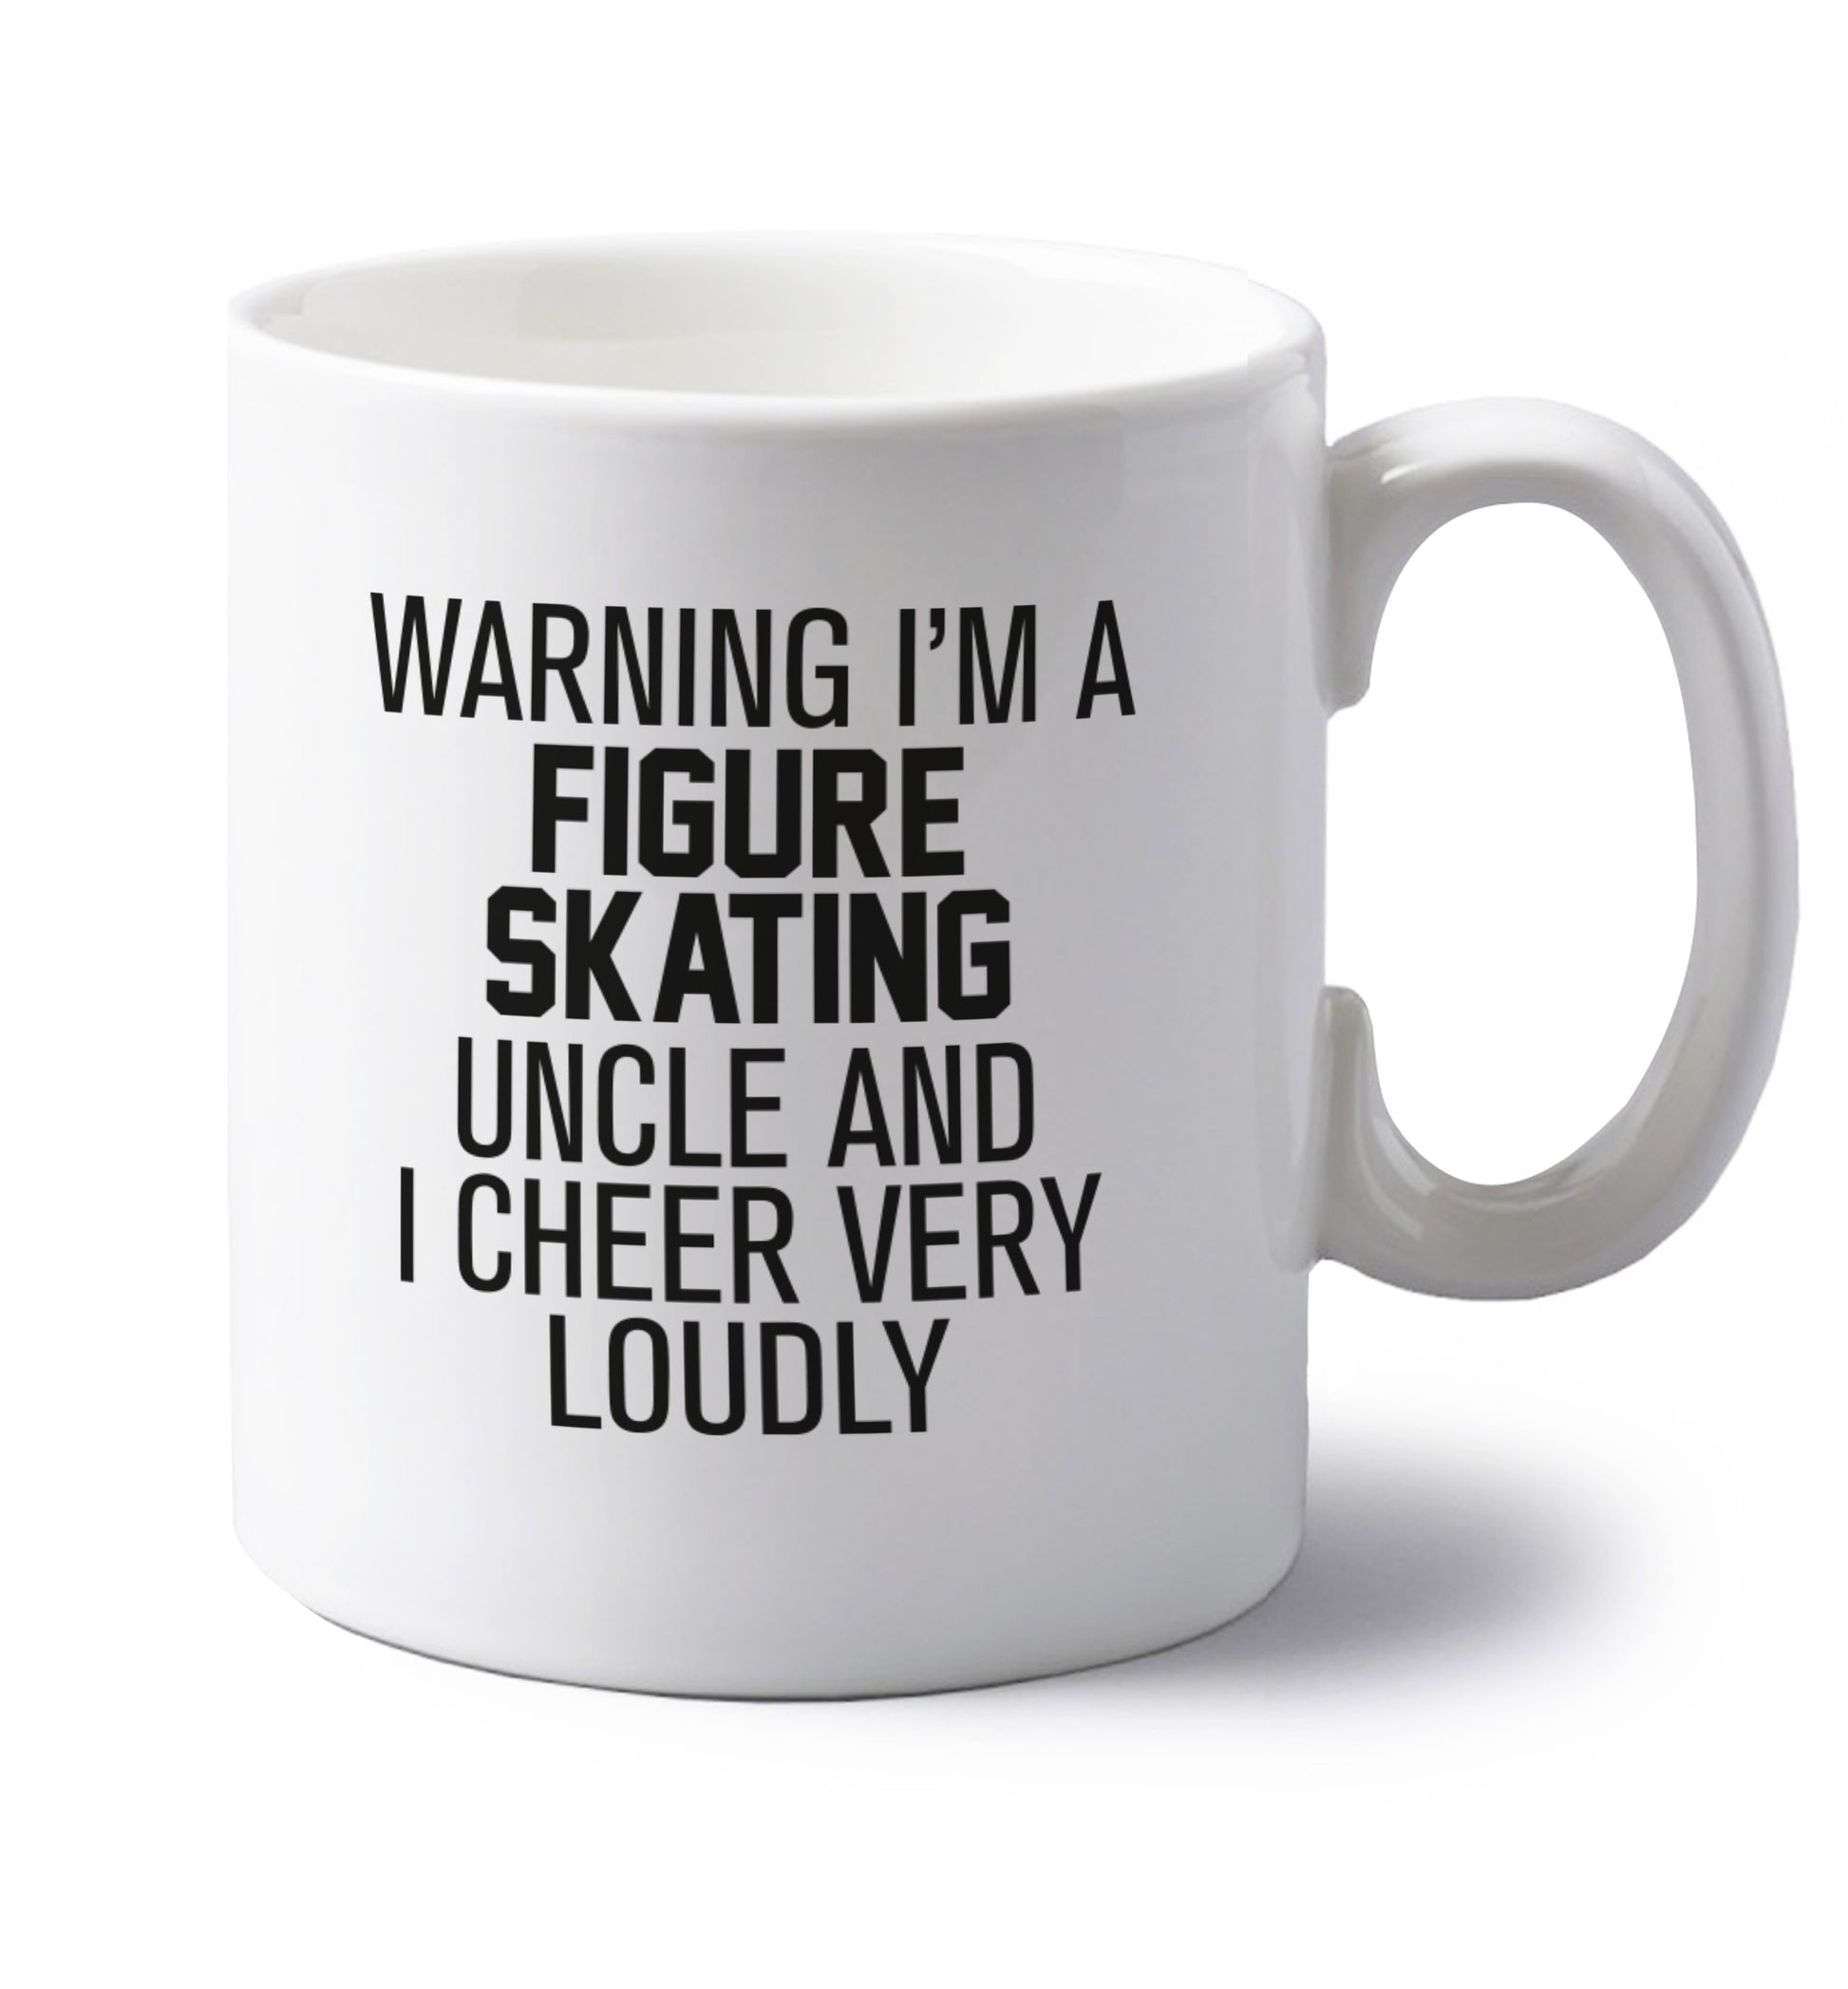 Warning I'm a figure skating uncle and I cheer very loudly left handed white ceramic mug 